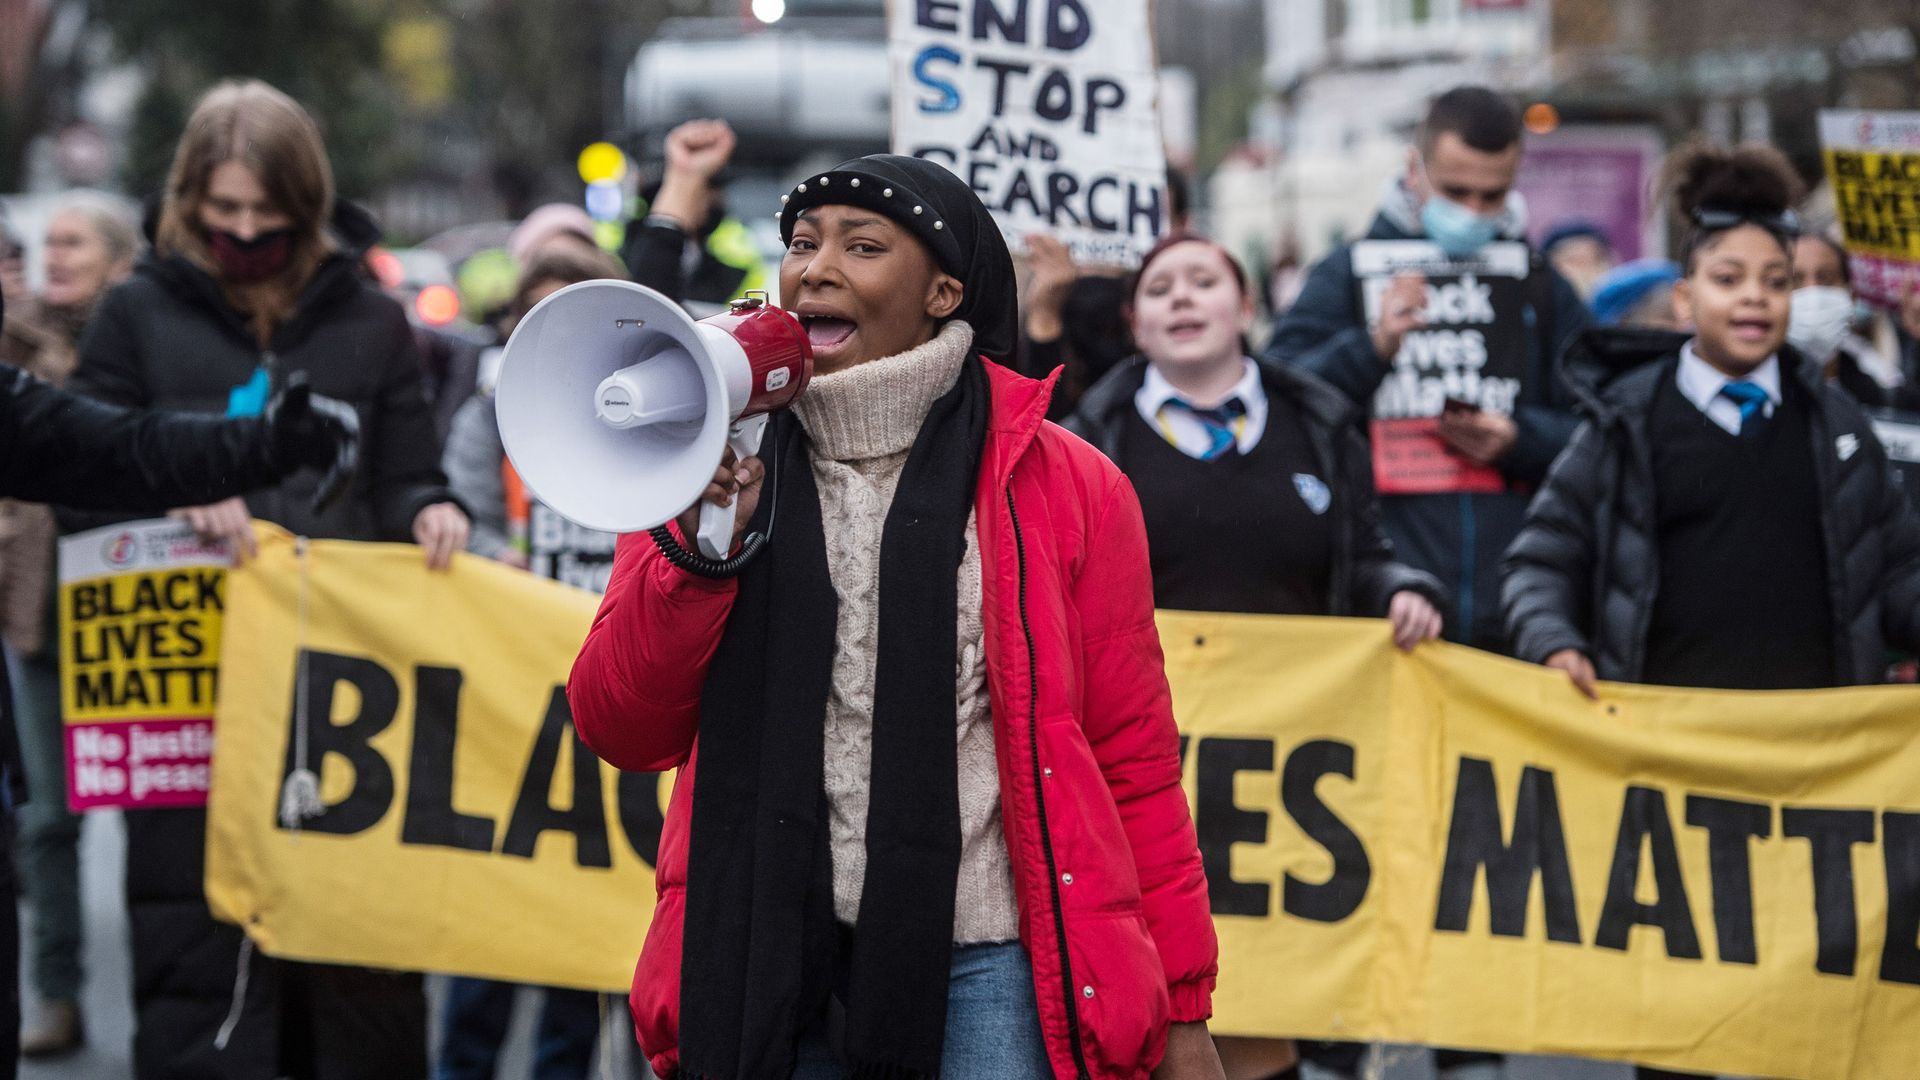 Photo of Sasha Johnson speaking into a megaphone and leading a BLM crowd